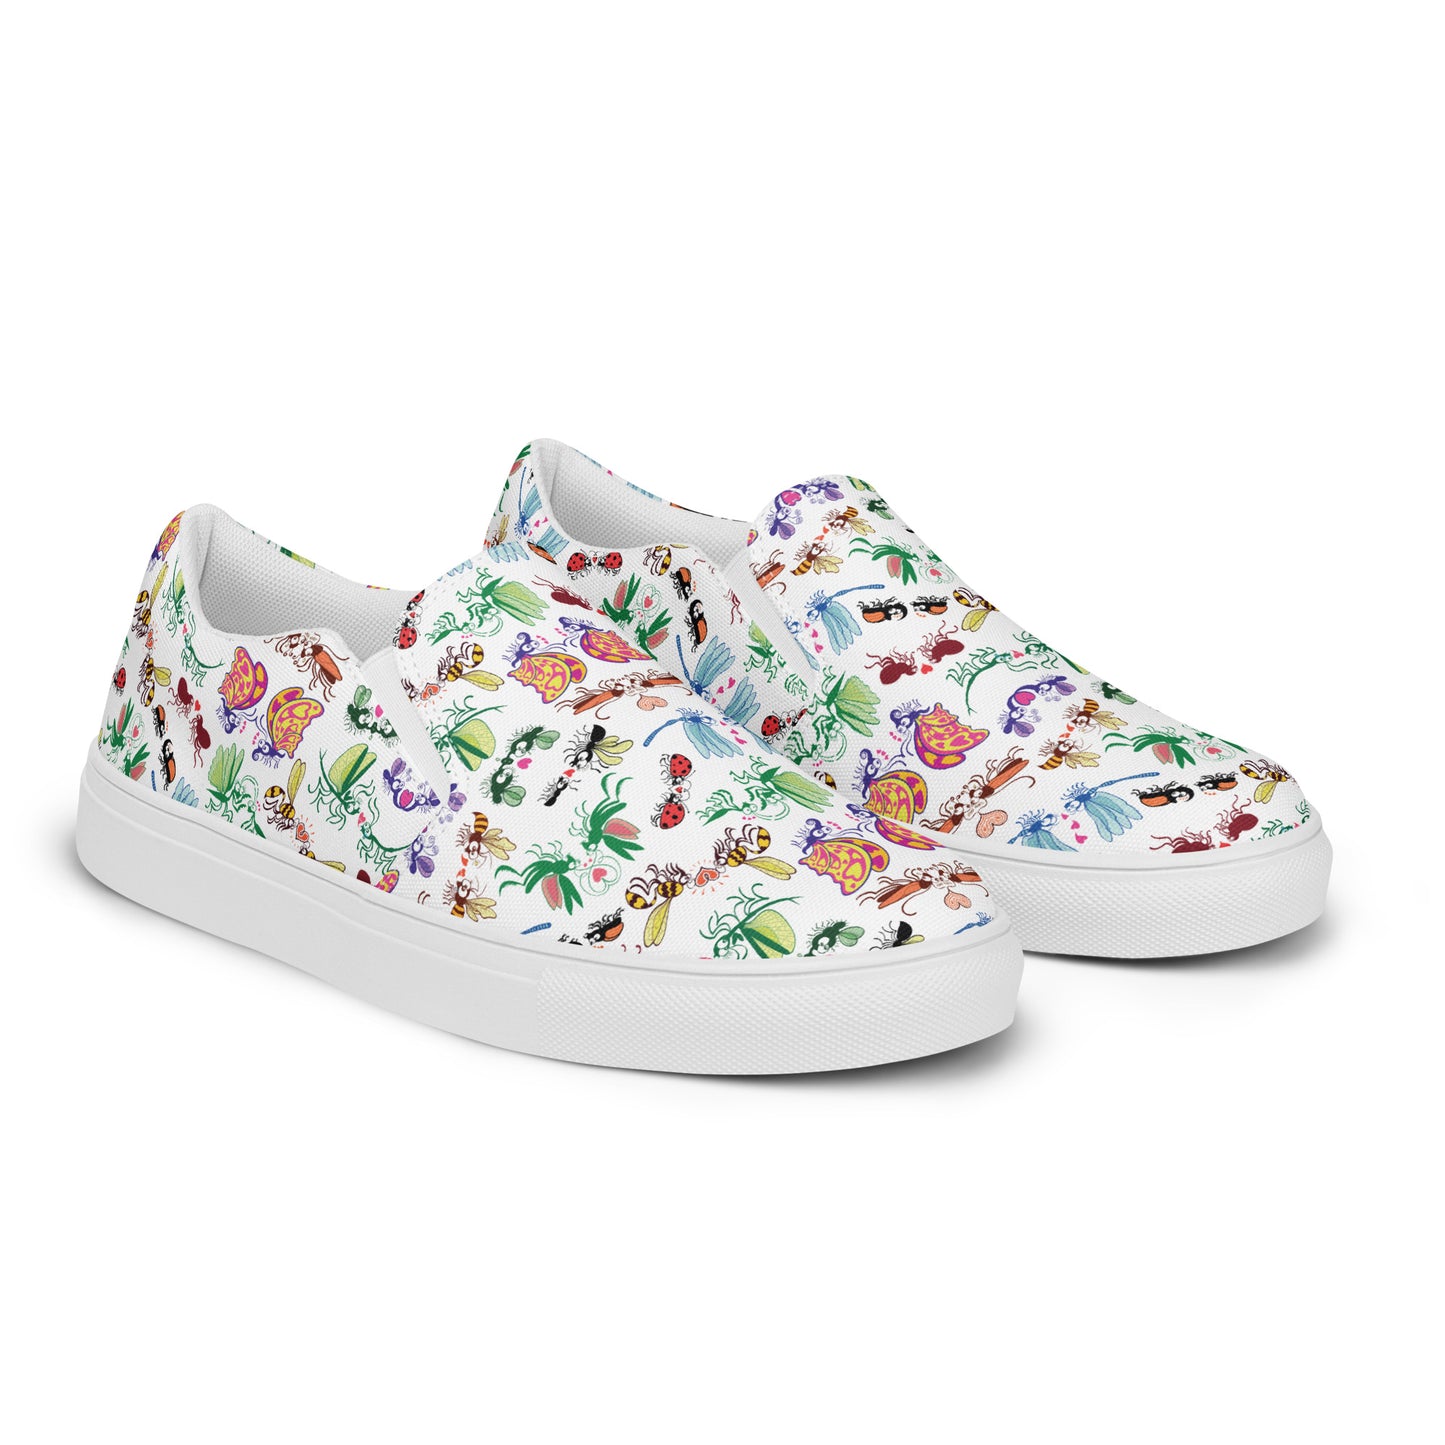 Cool insects madly in love Women’s slip-on canvas shoes. Overview